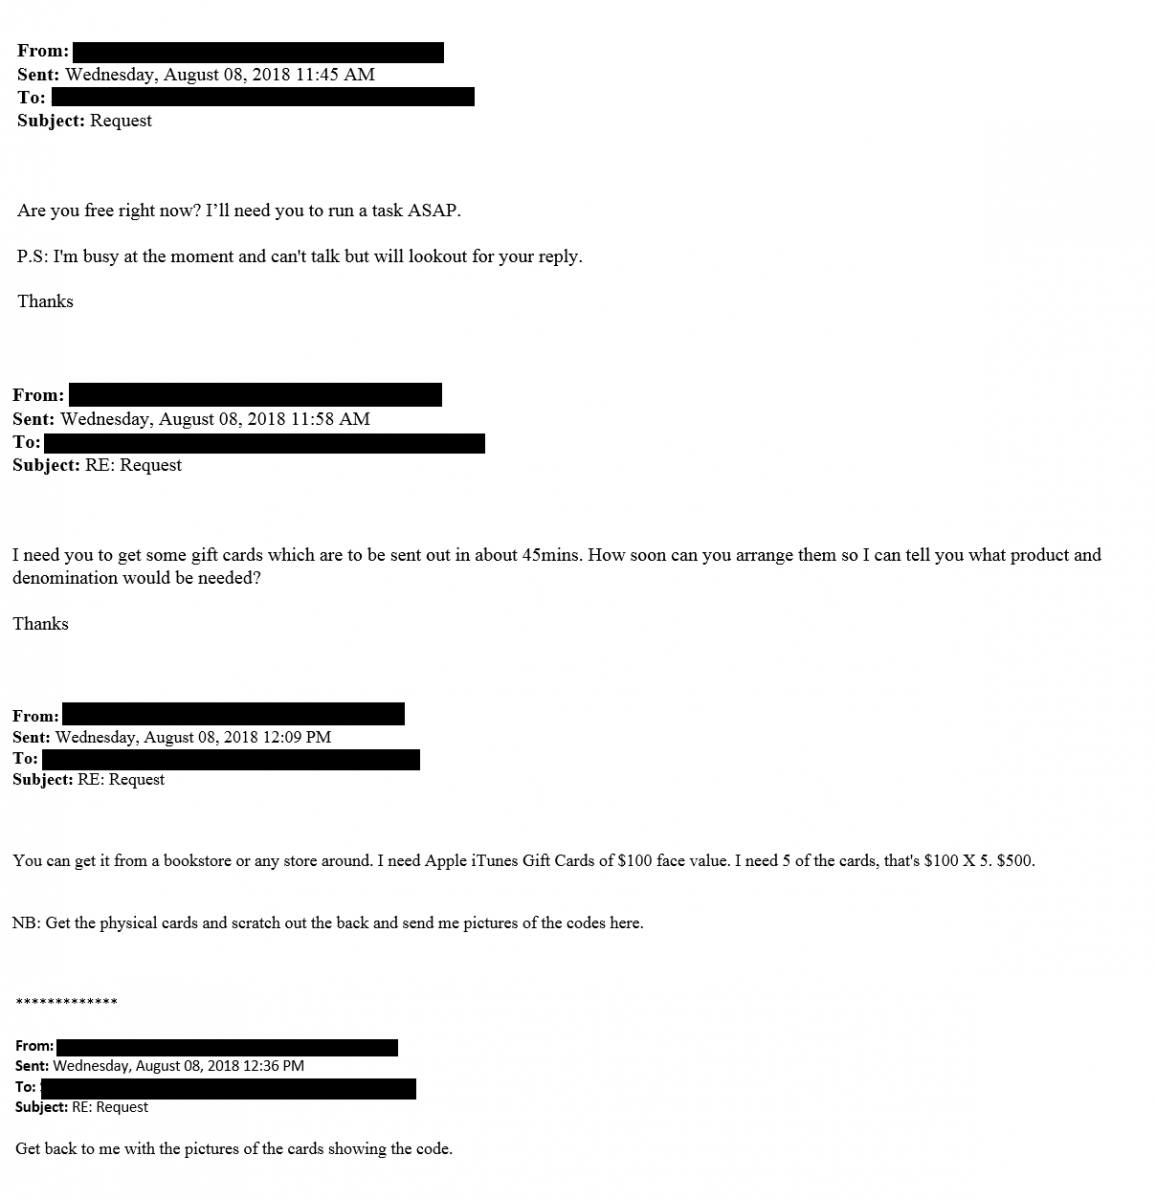 This is an image of an email exchange between a spear phishing target and the sender.